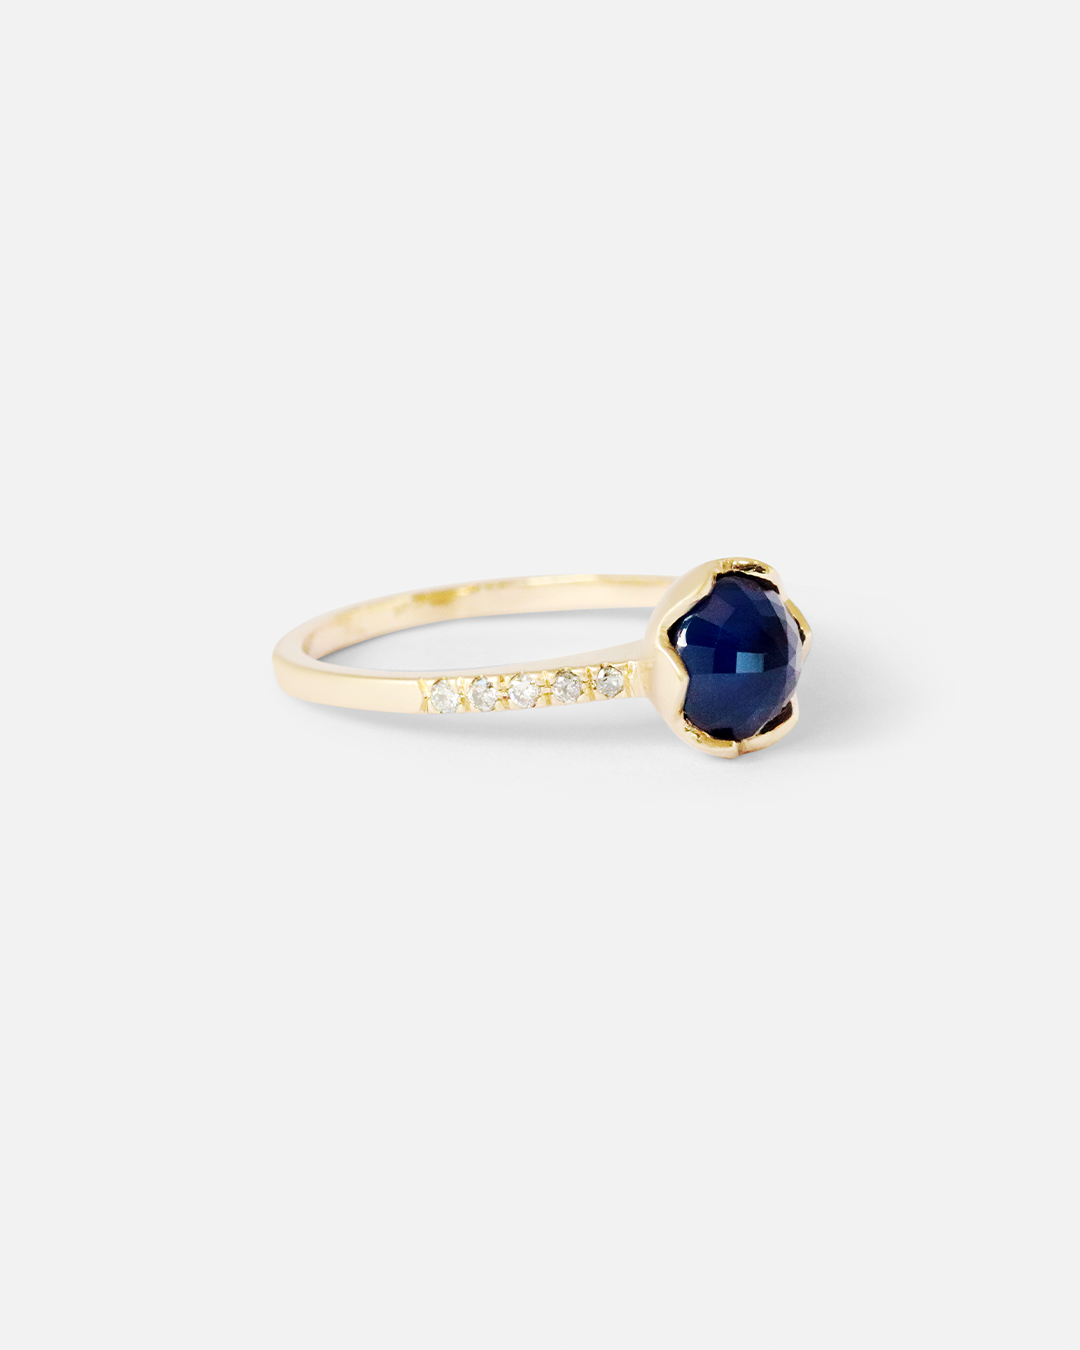 Pave / 6.5mm Blue Sapphire Ring By fitzgerald jewelry in Engagement Rings Category